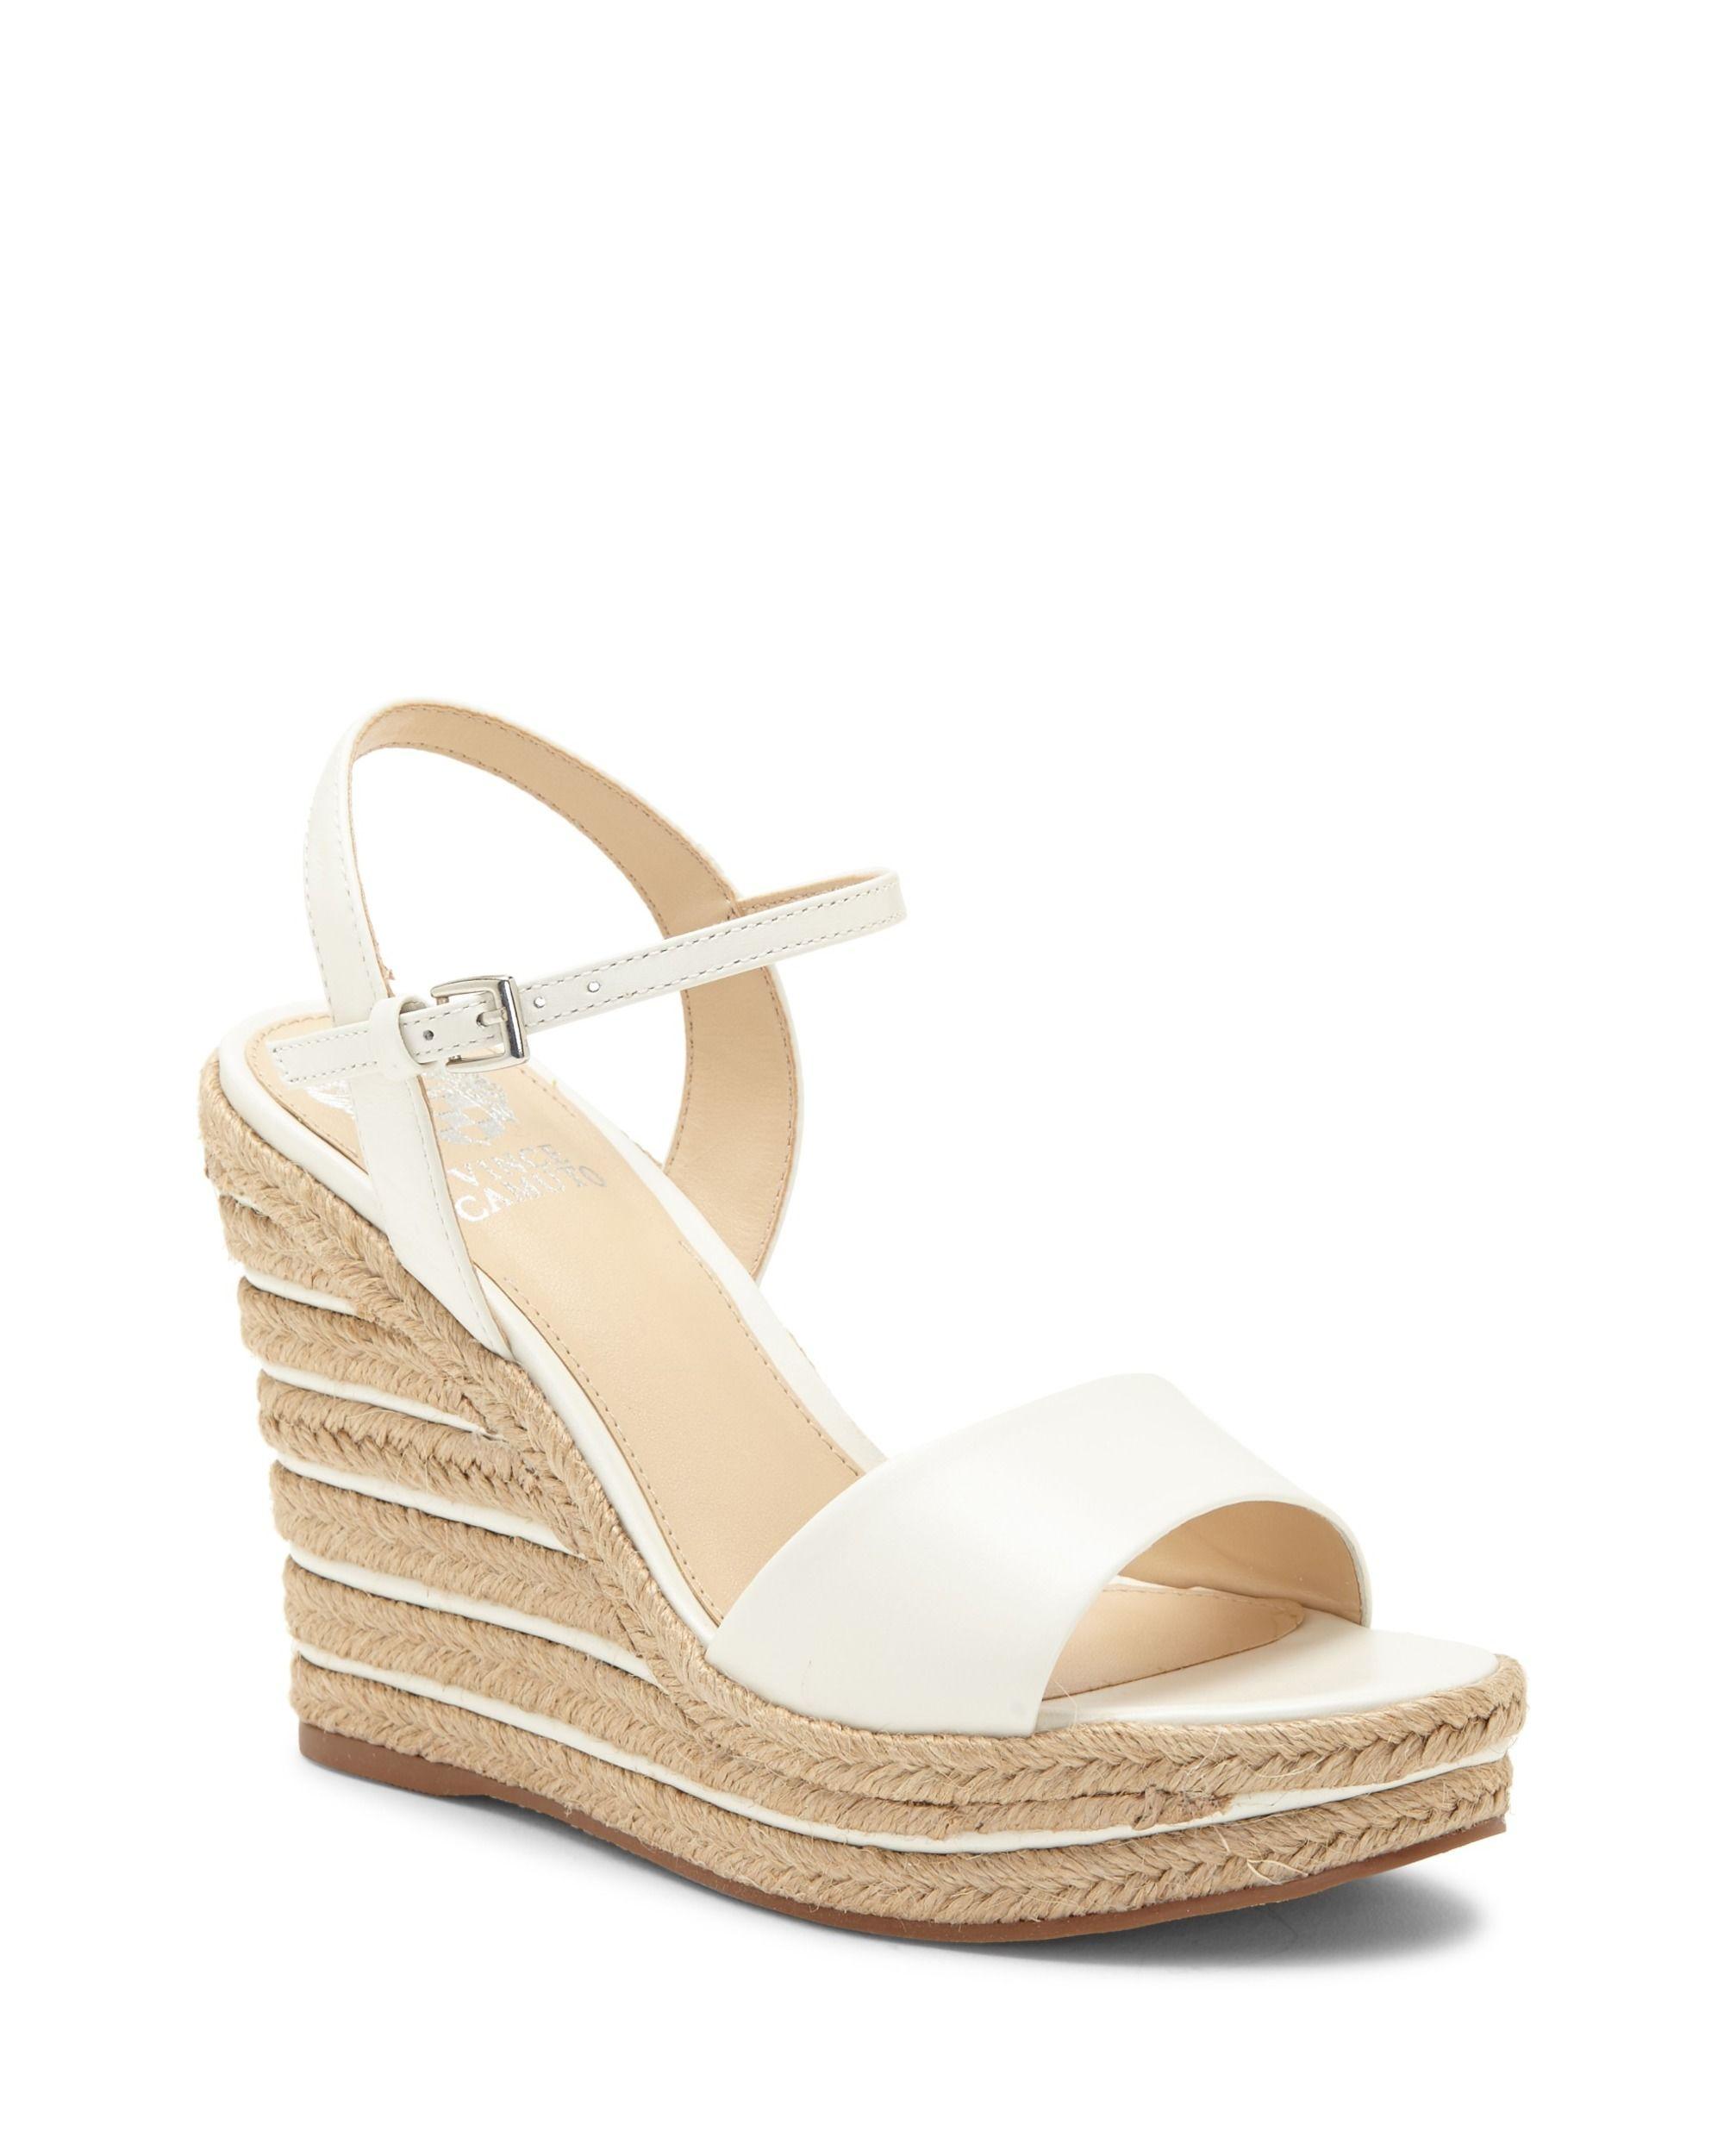 Vince Camuto Leather Marybell Espadrille Wedge Sandal in White Leather ...